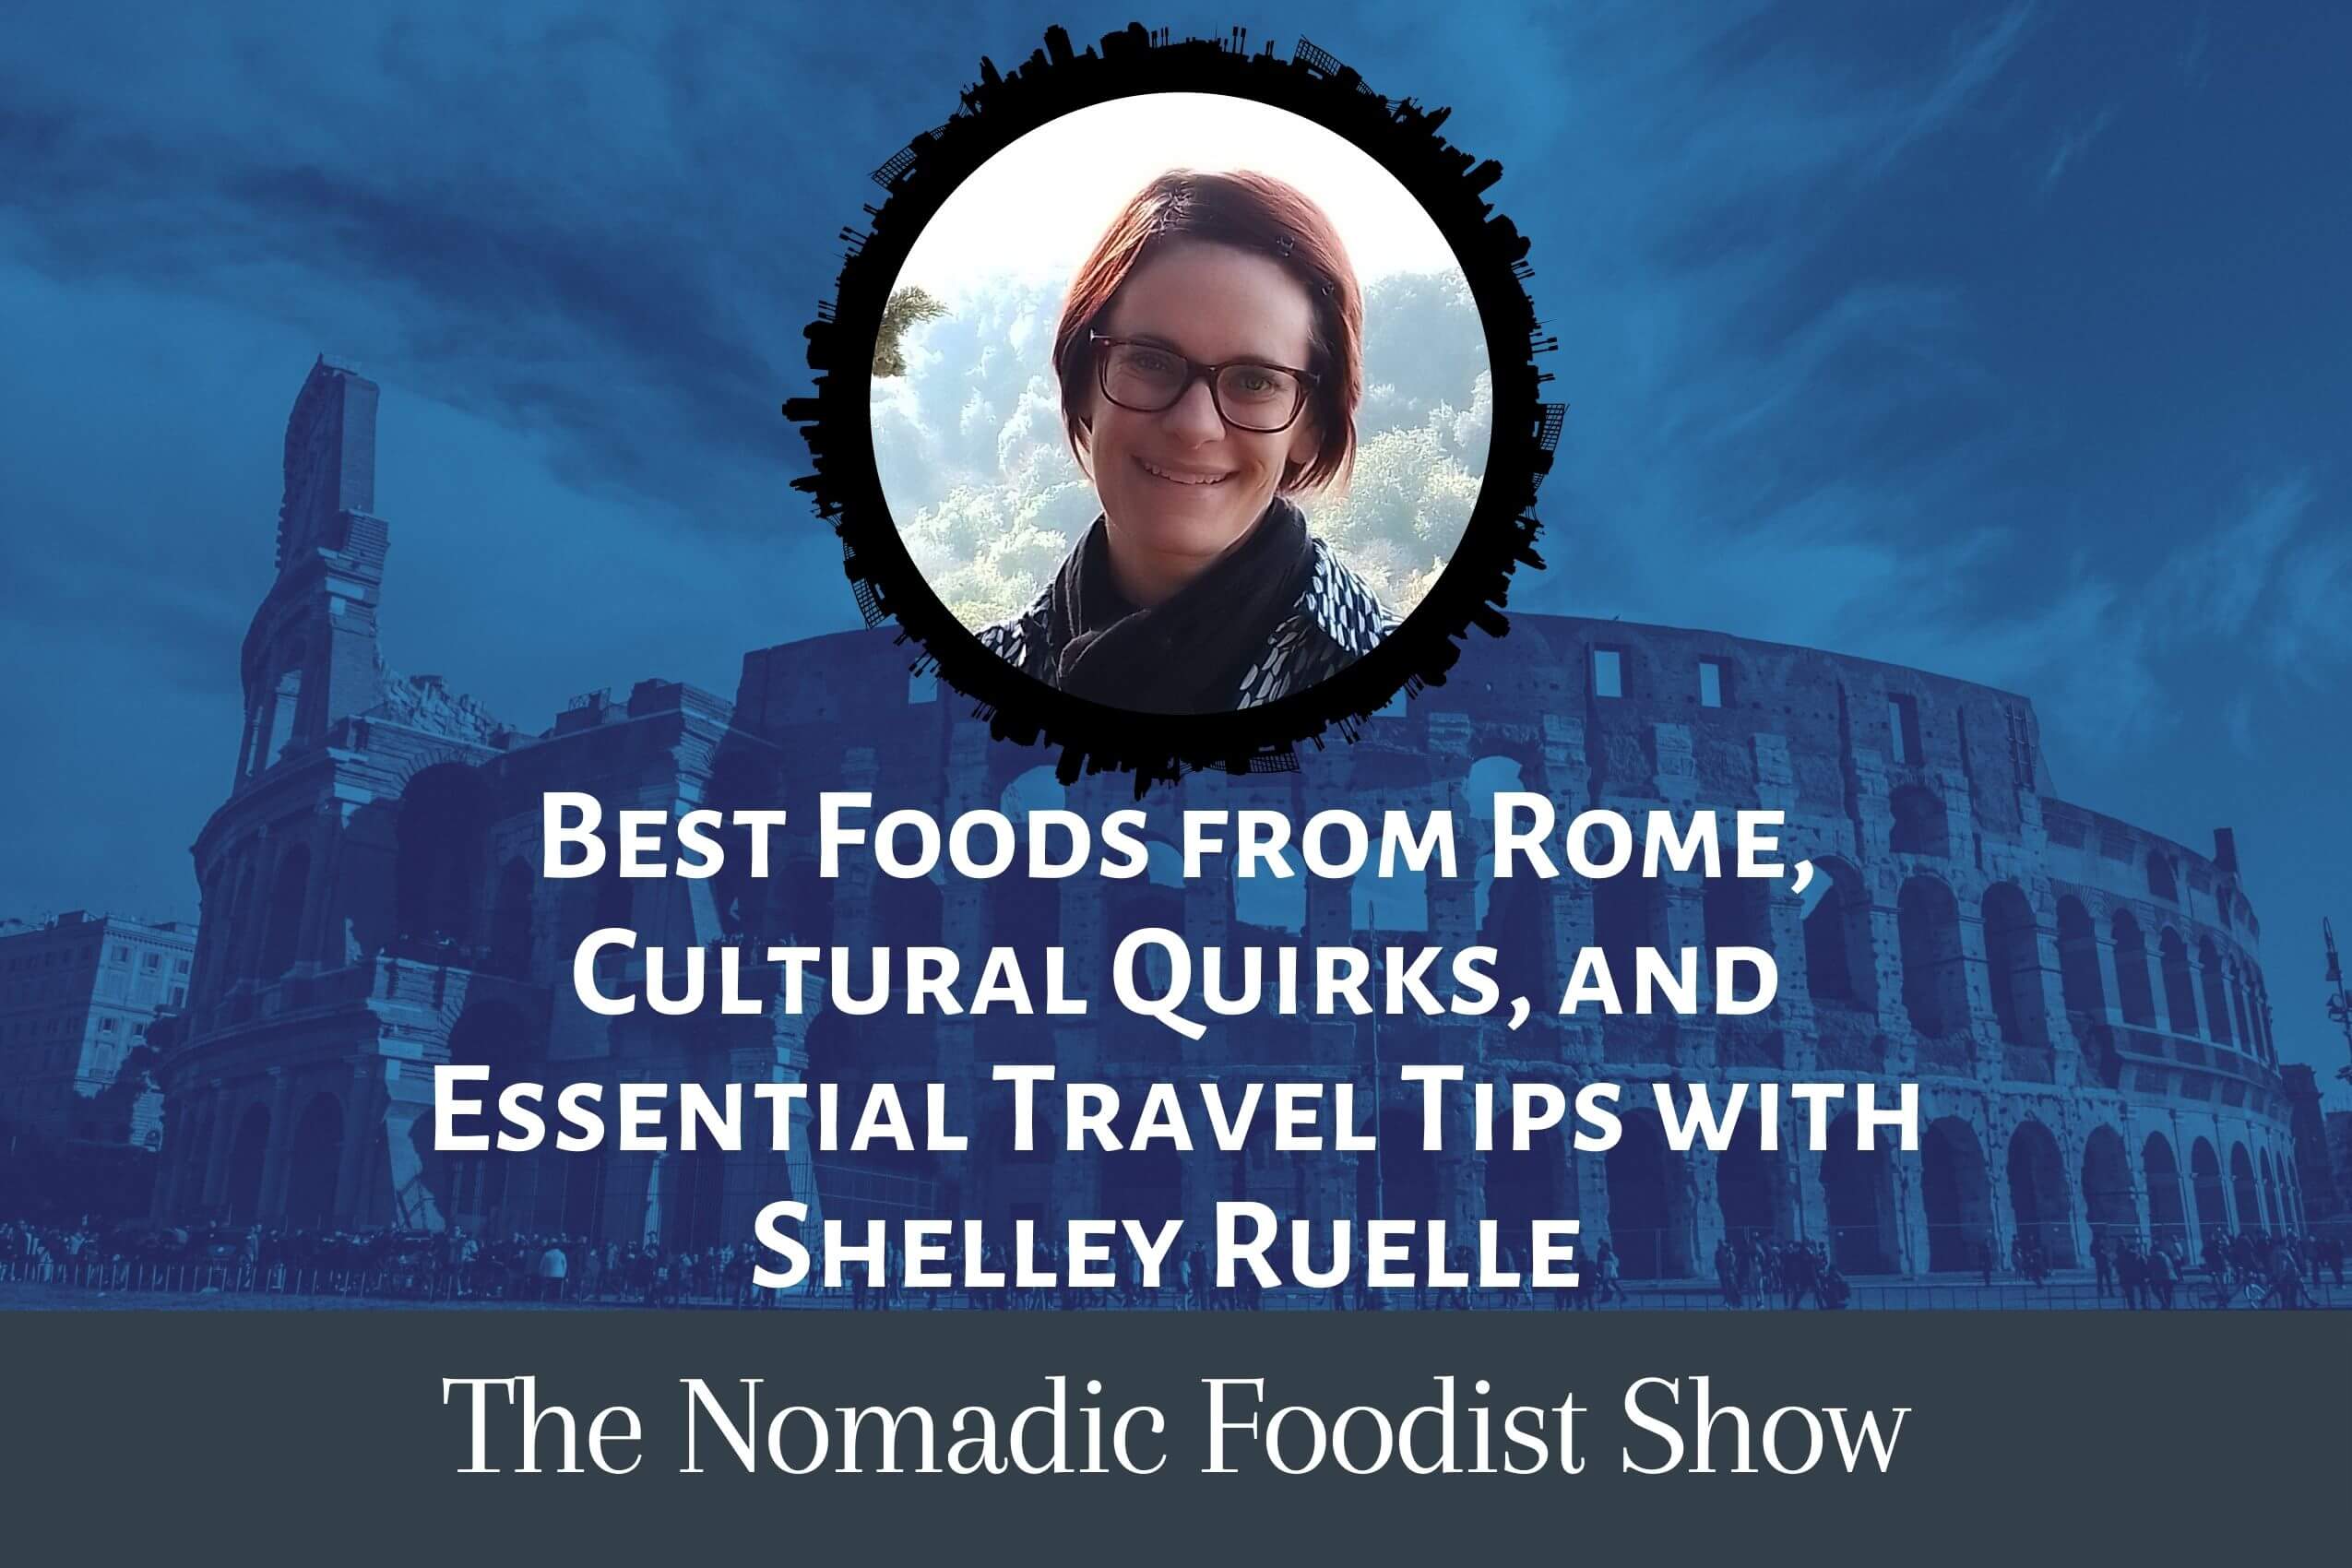 interview with shelley ruelle about rome